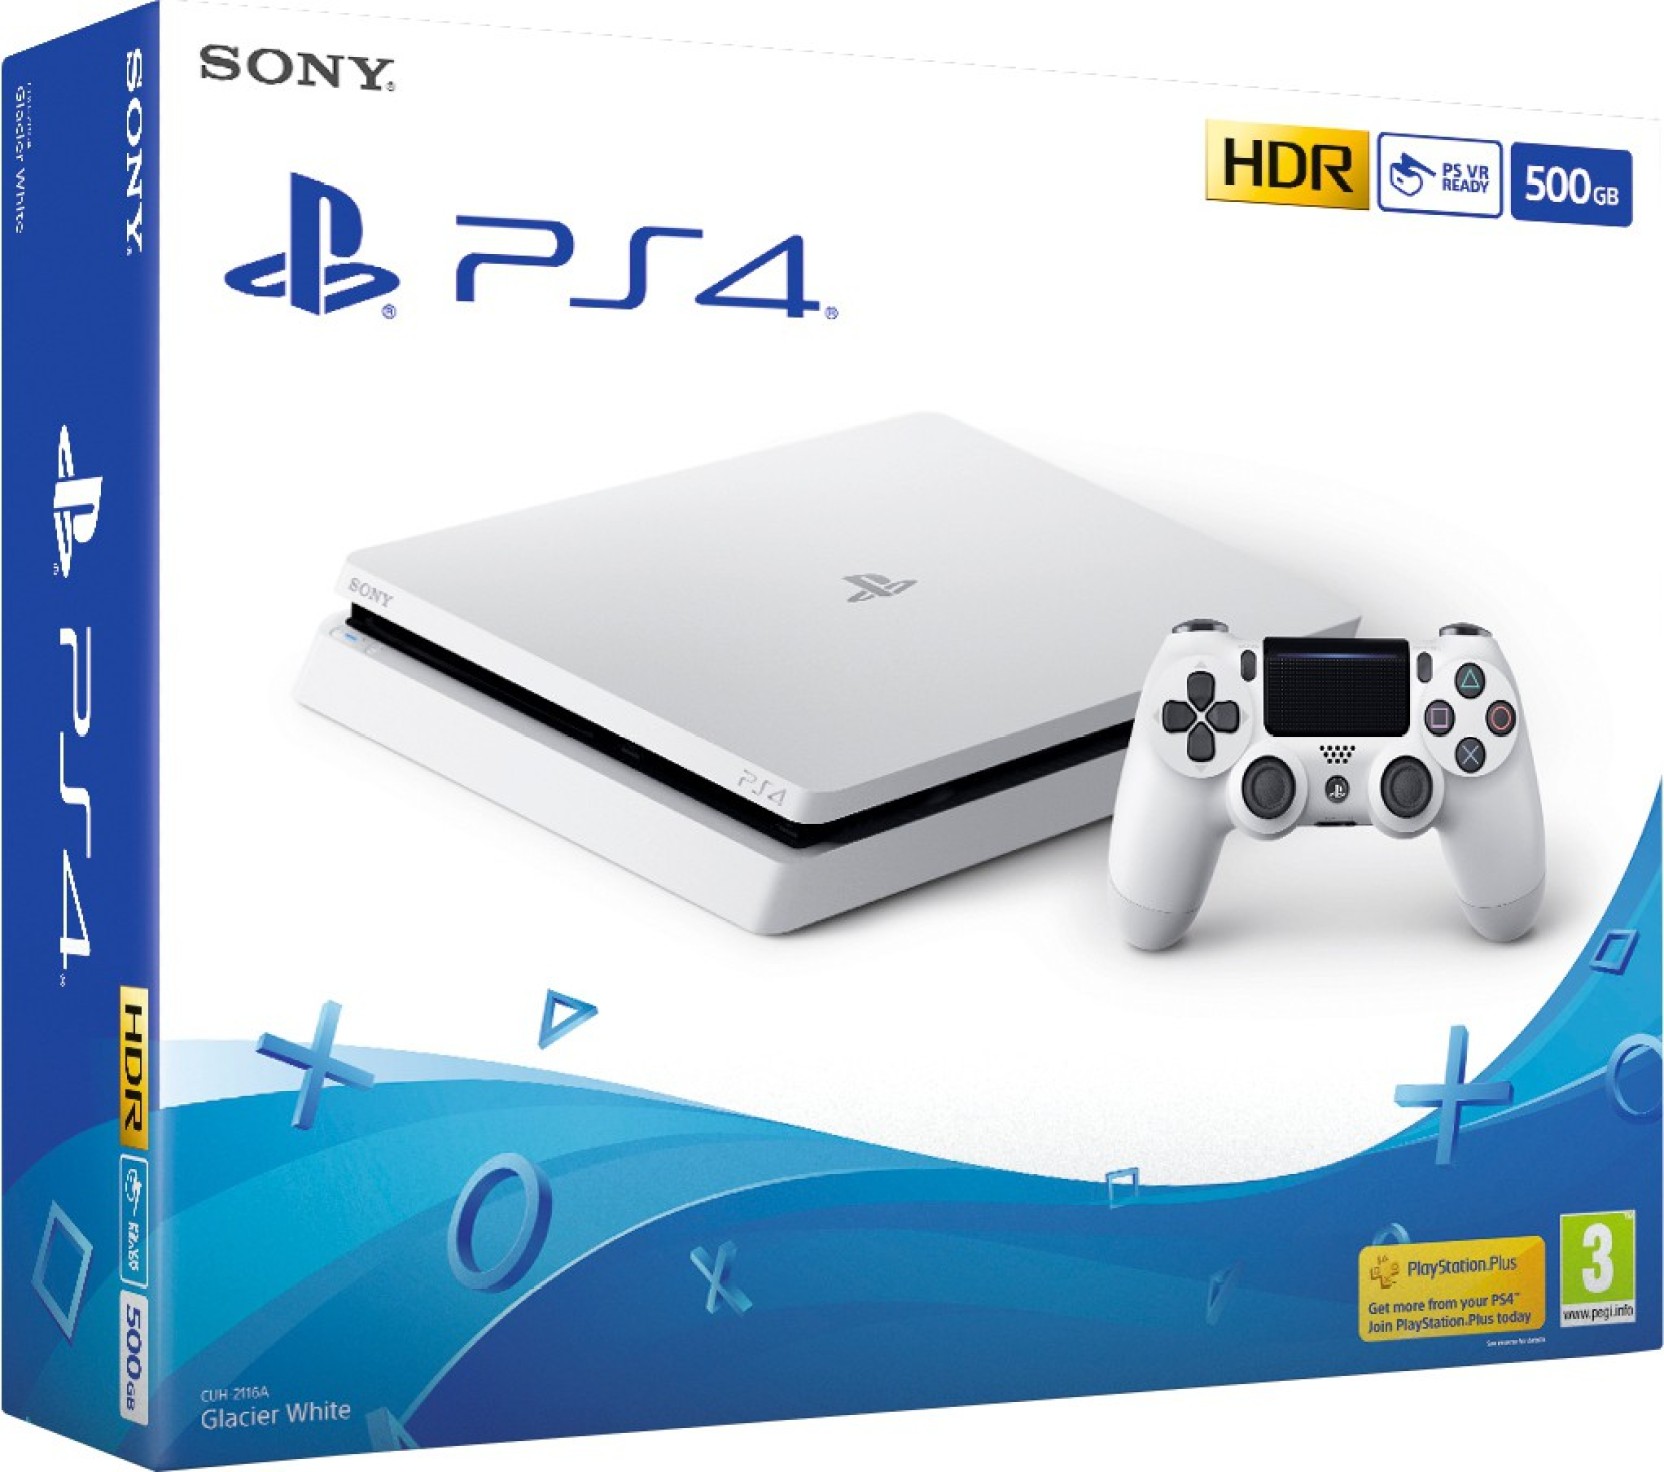 Sony Playstation 4 Ps4 Slim 500 Gb Price In India Buy Sony